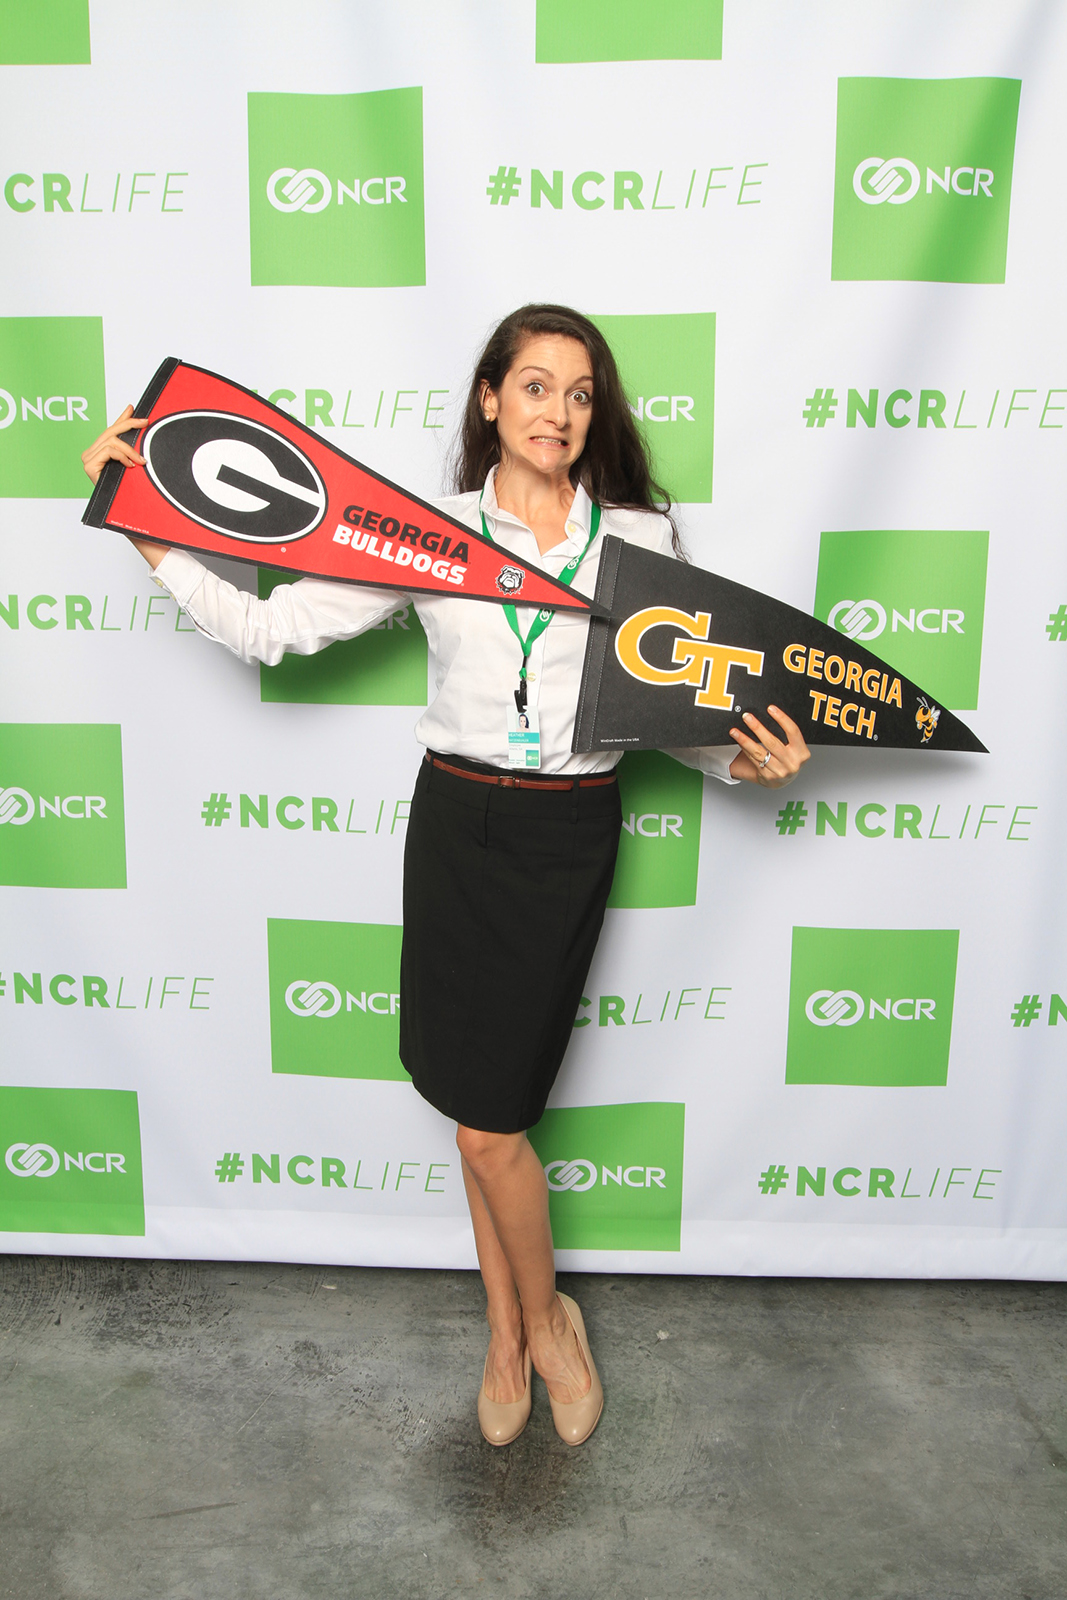 heather arentson with uga and georgia tech school penants